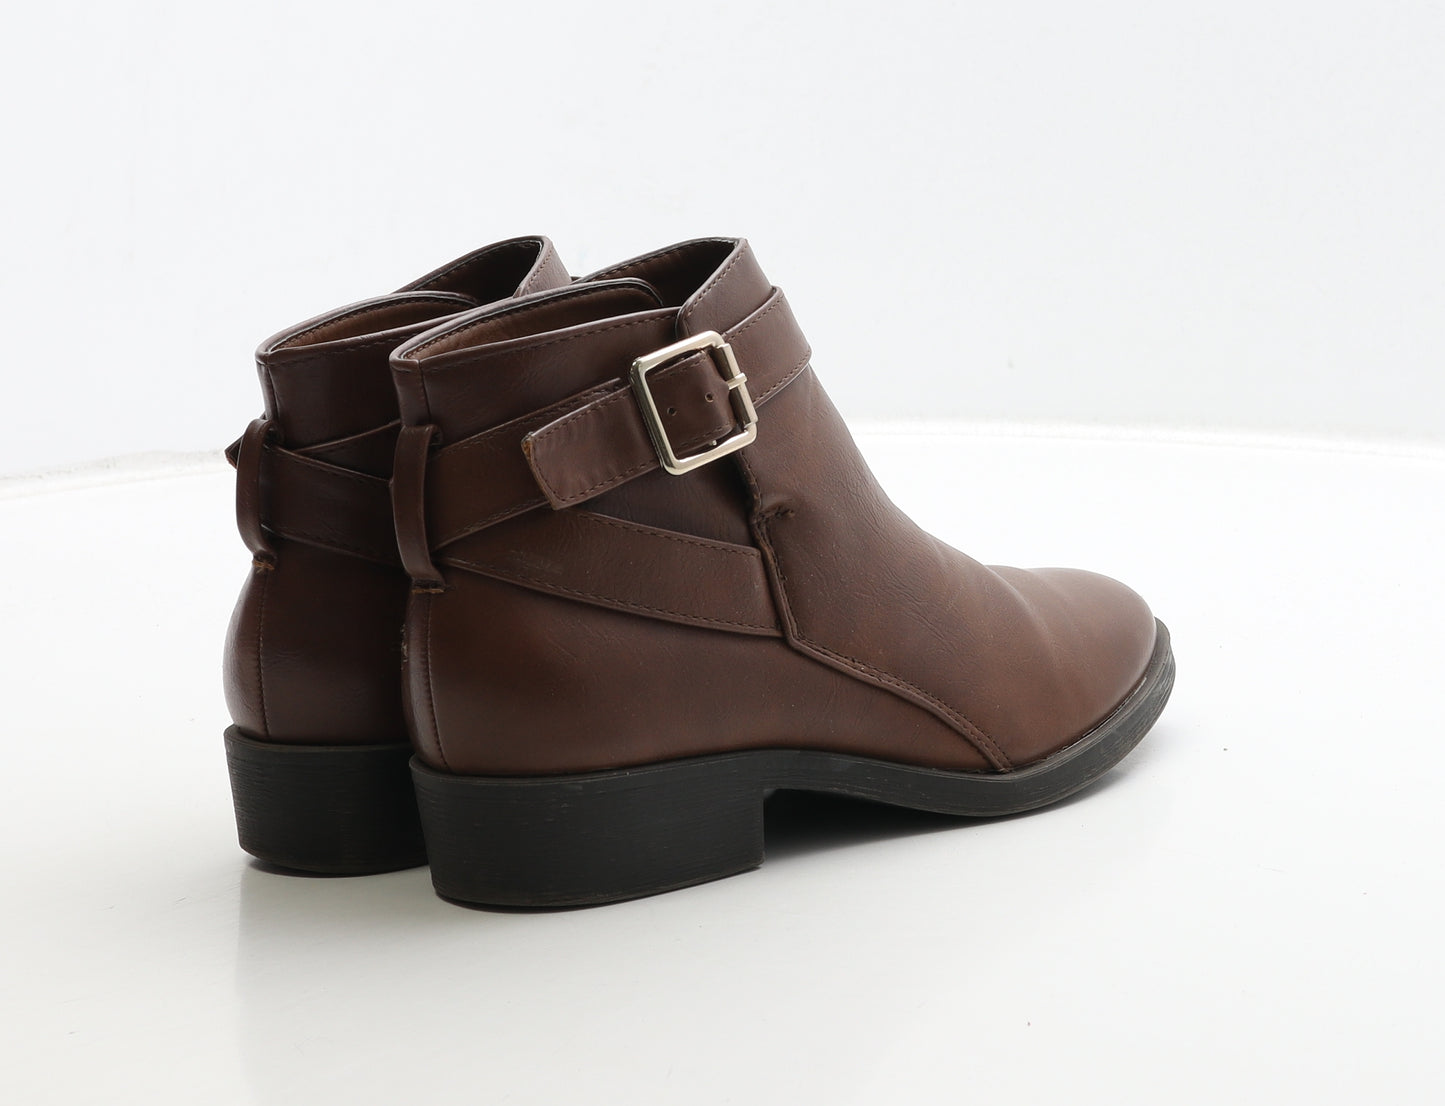 New Look Womens Brown Leather Bootie Boot UK 3 36